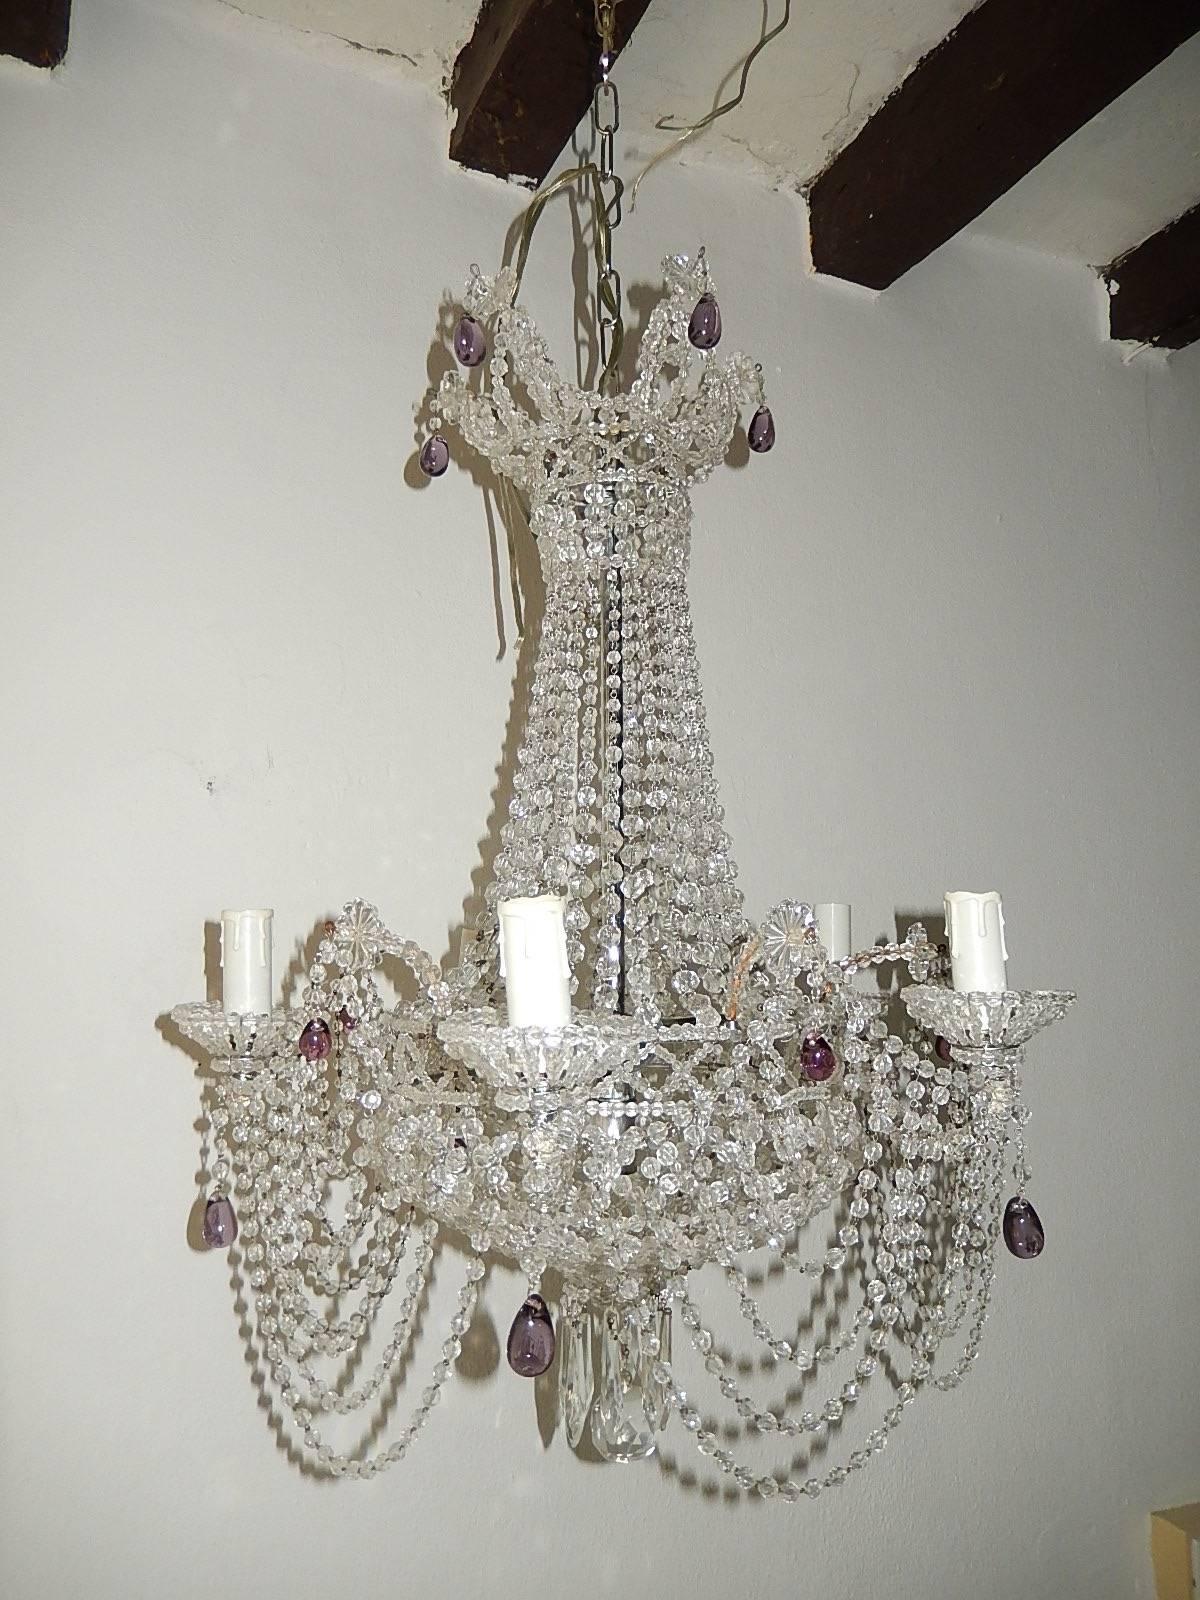 Housing six lights, five encircling in beaded cups and one in center. Completely beaded with a beaded lace bottom. Adorning amethyst drops on top and in center. Adding another 12 inches of original chain and canopy. Rewired and ready to hang. Free